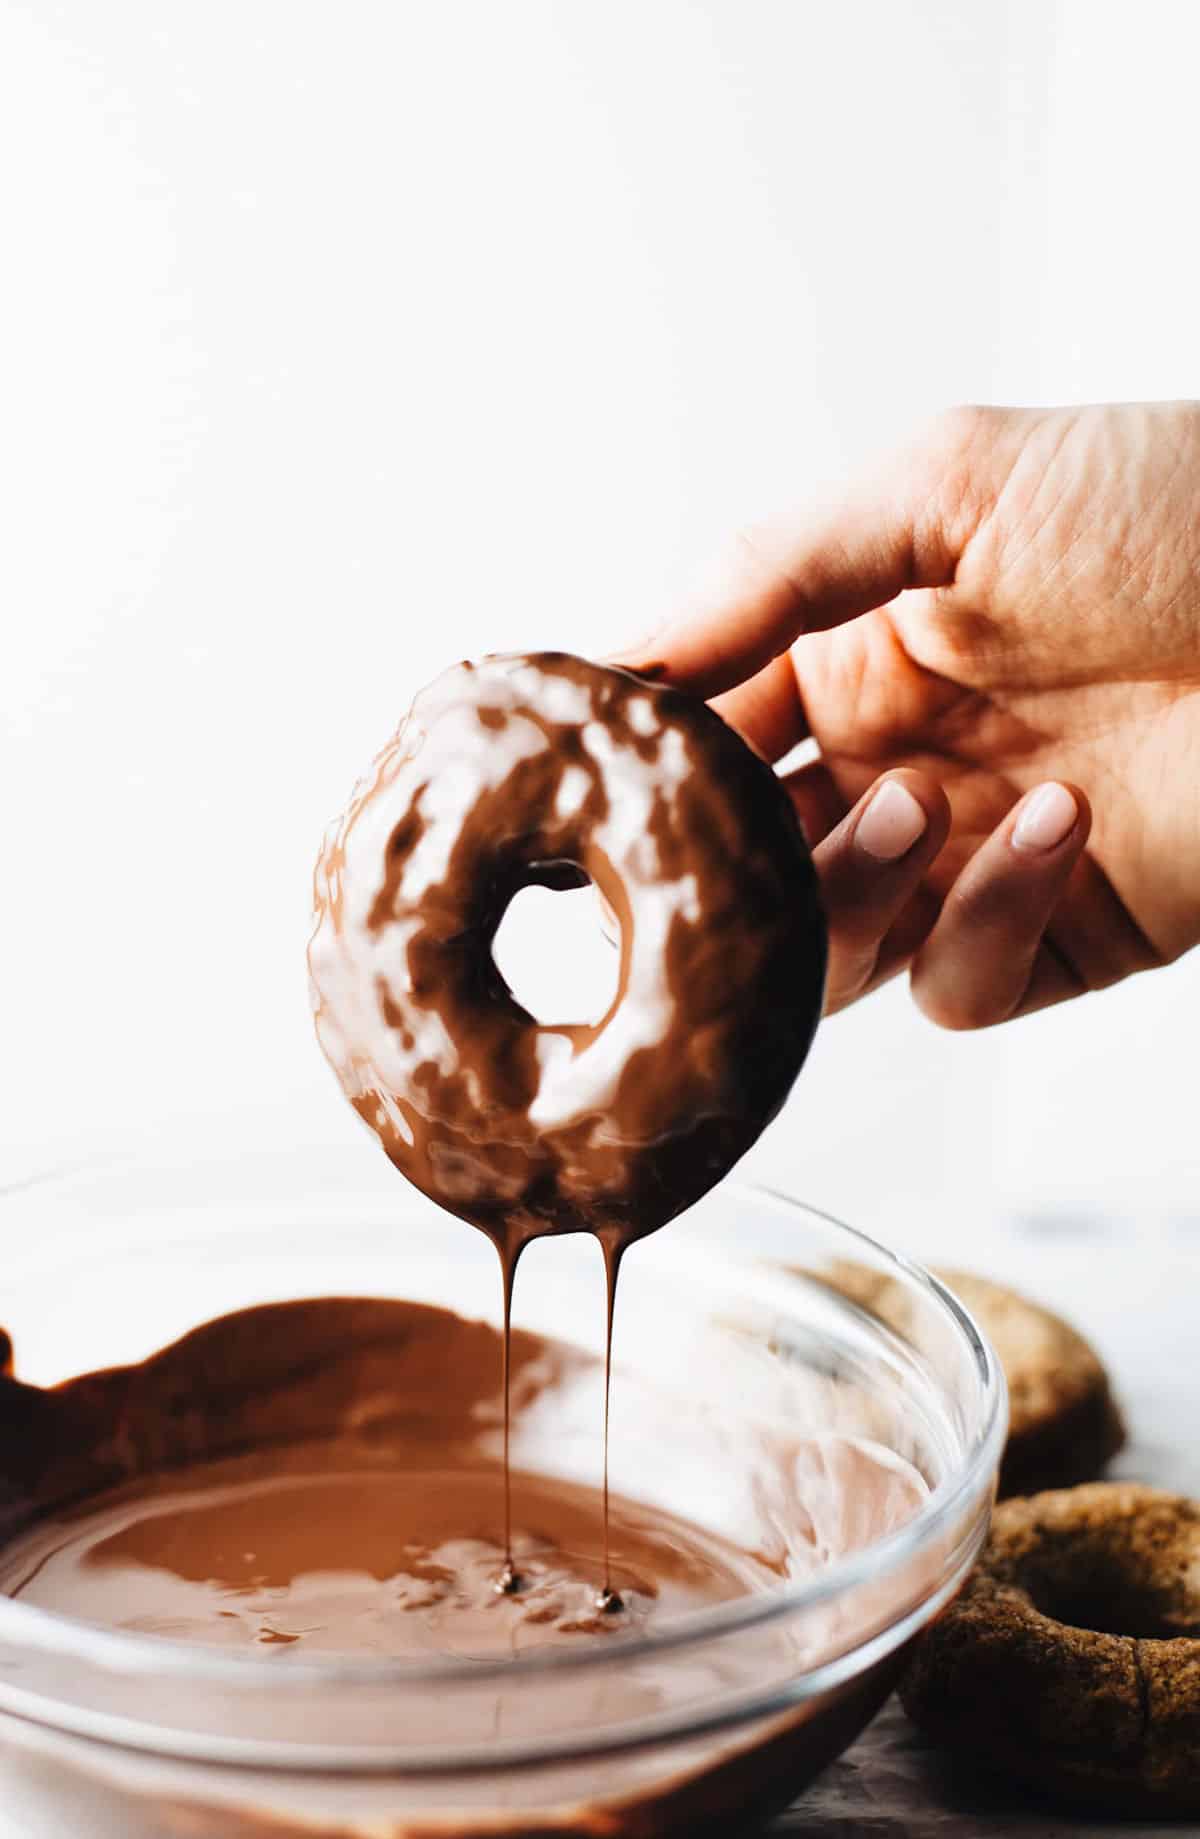 Hand with banana doughnut being dipped in chocolate glaze